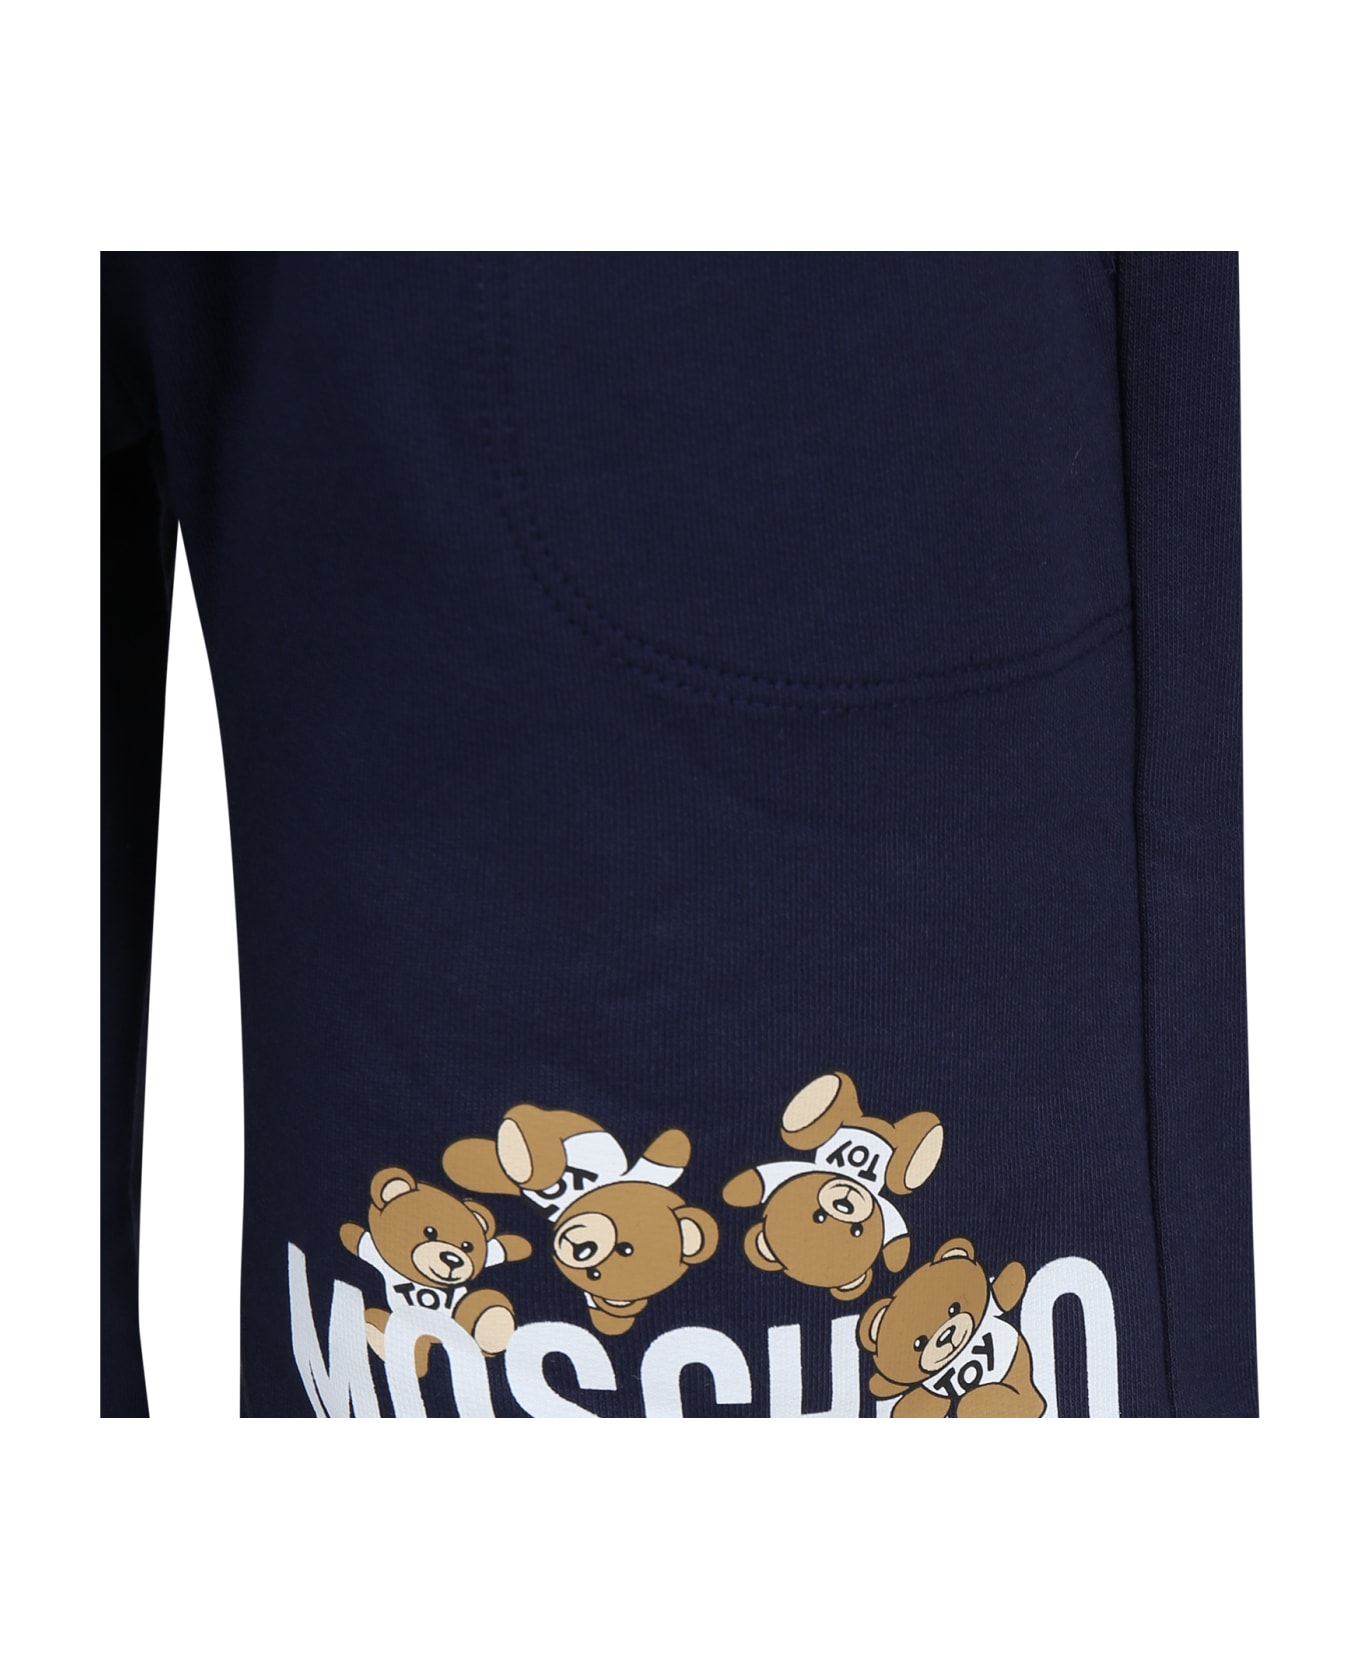 Moschino Blue Shorts For Kids With Teddy Bears And Logo - Blue ボトムス